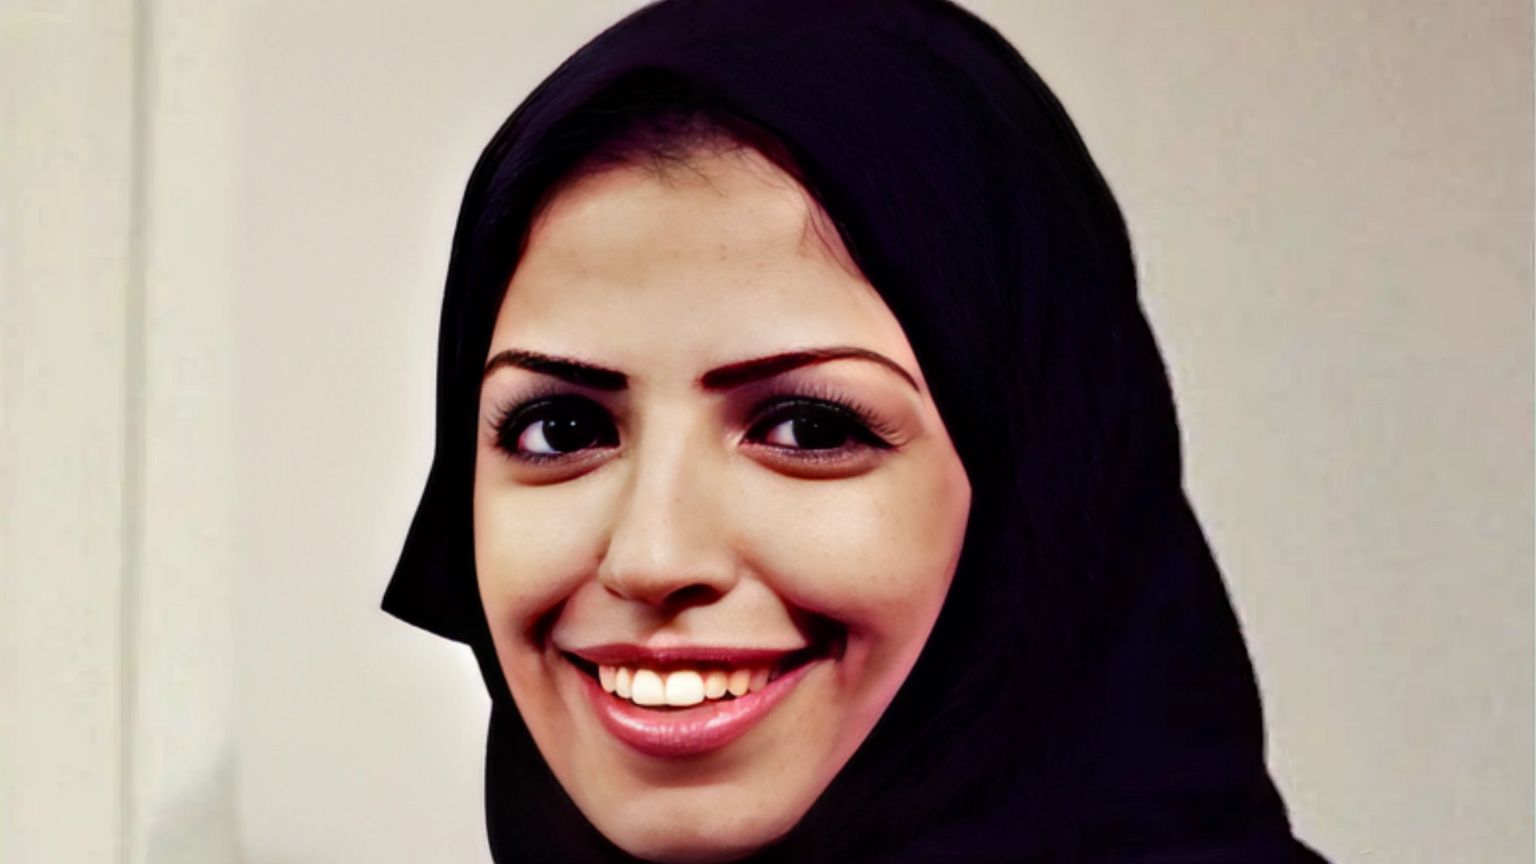 Saudi woman is jailed for 34 years over freedom-supporting Tweets